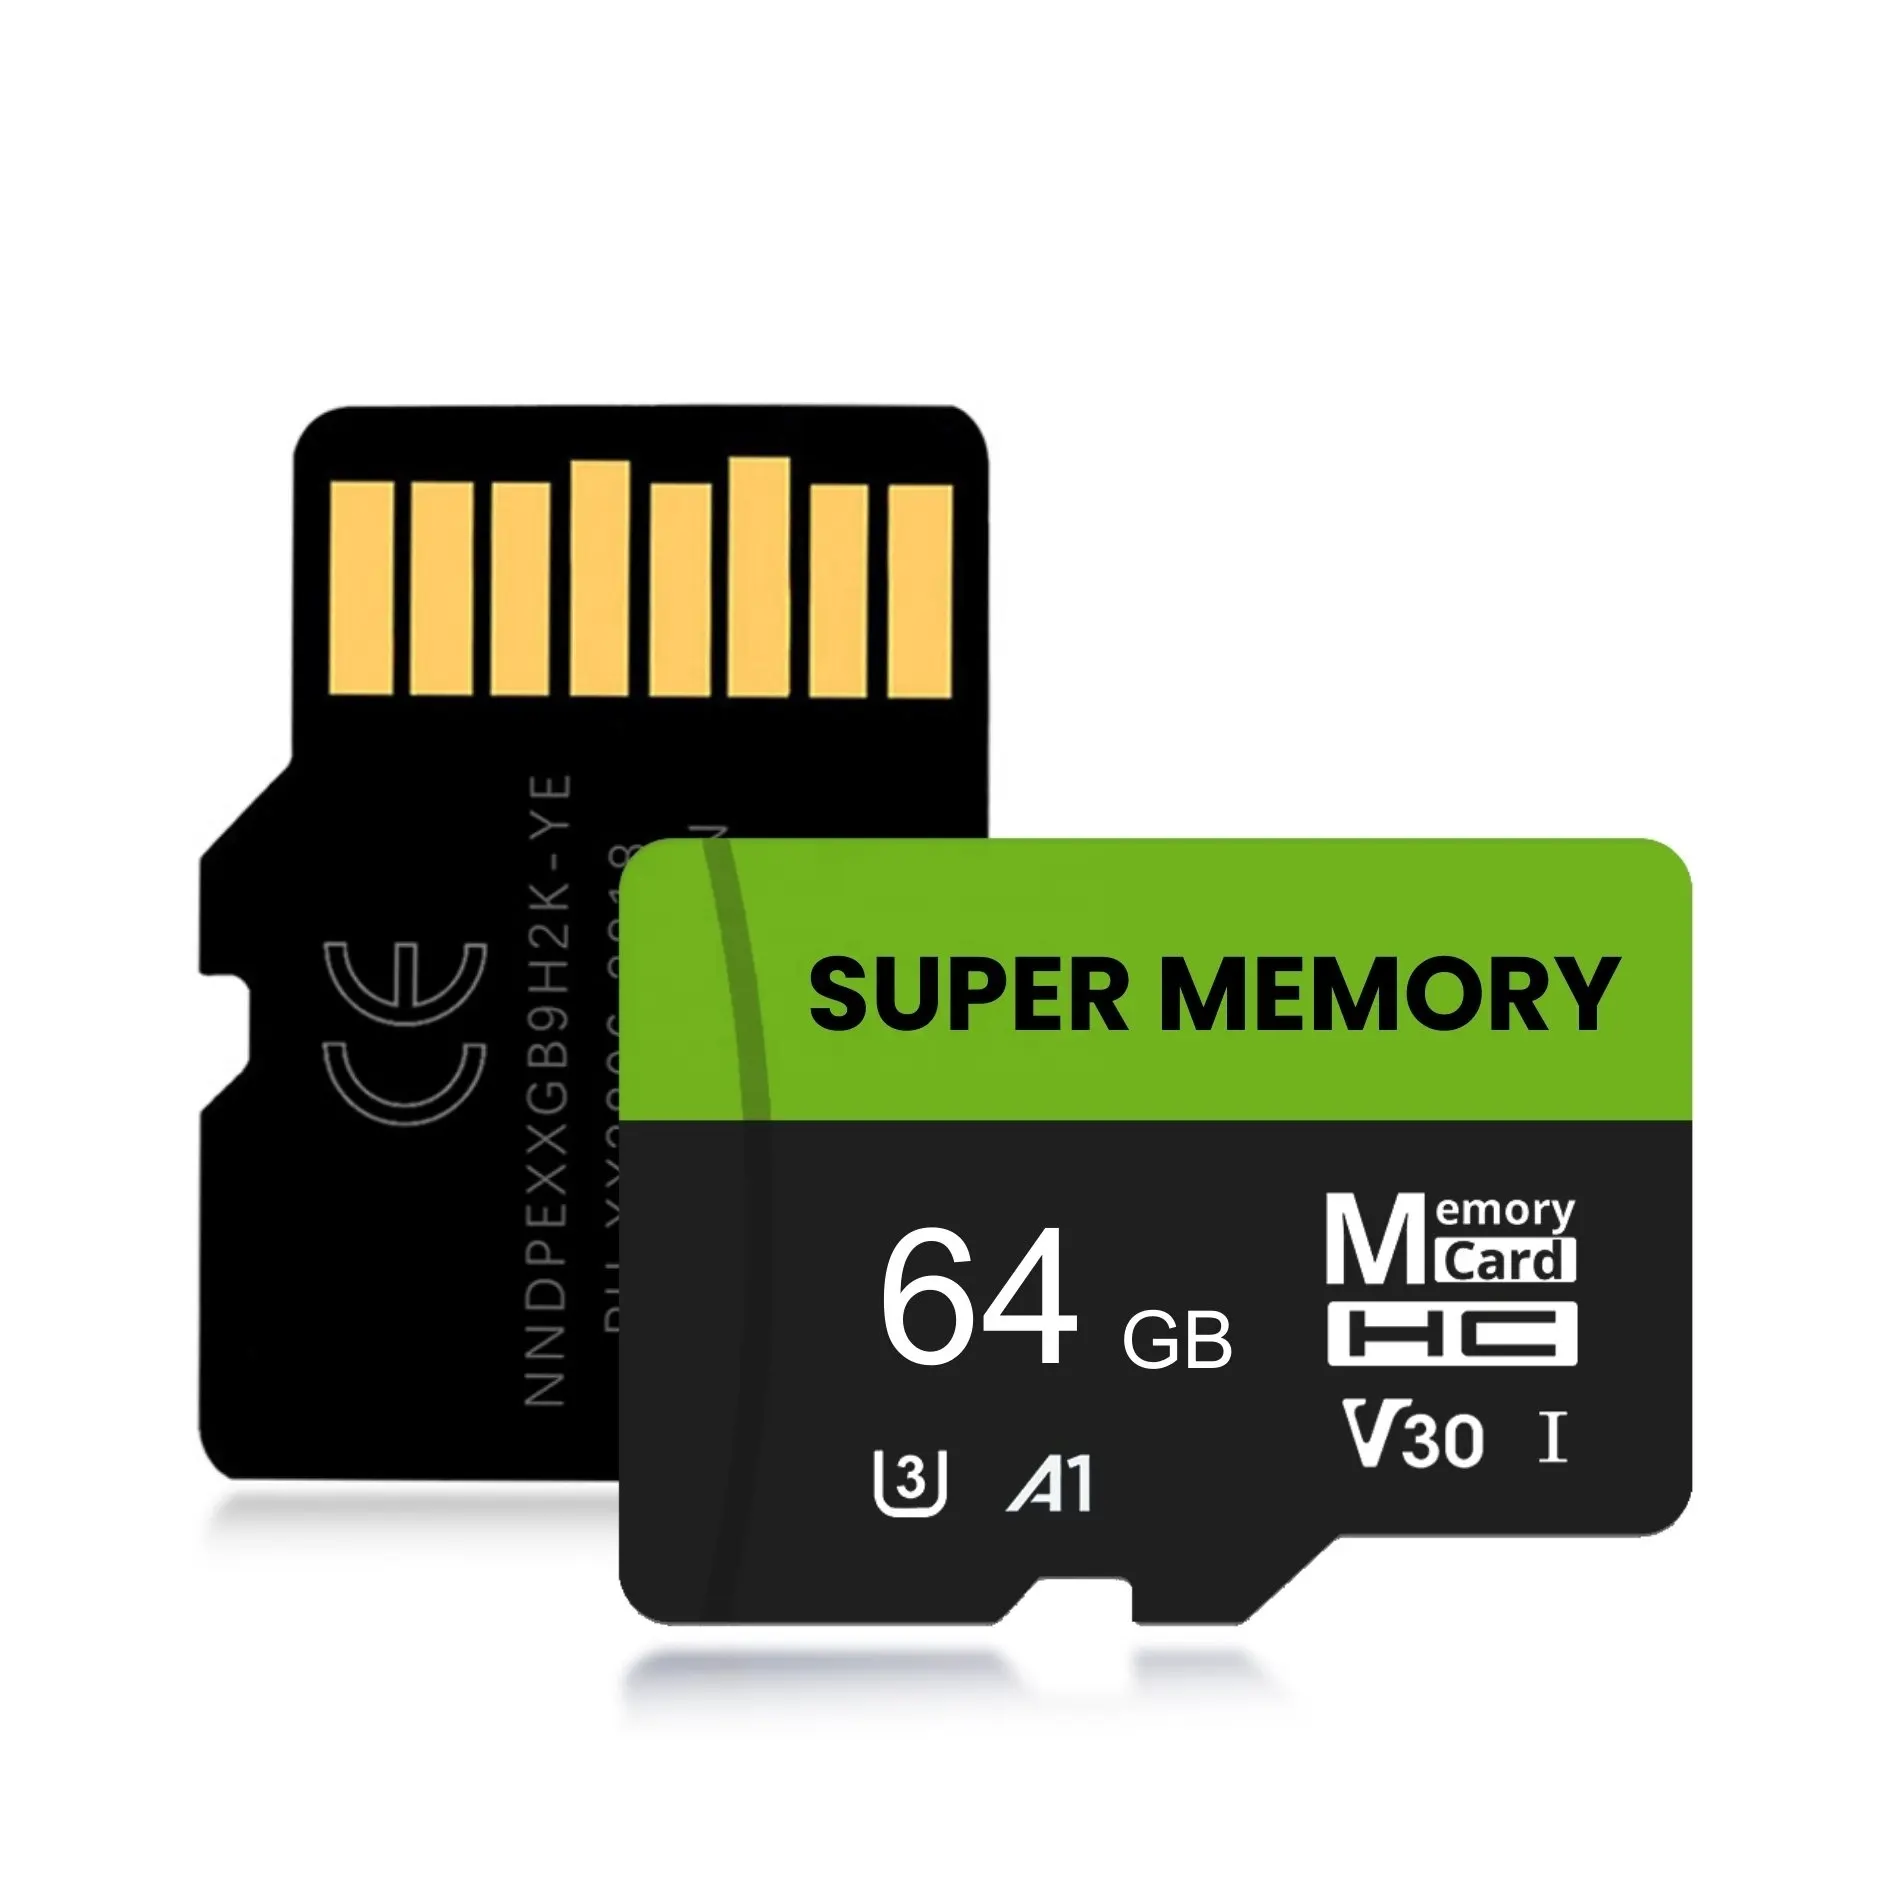 Elite-X U3 Class 10 UHS-I A1 V30 4K 64GB Ultra HD Memory card Micro tf sd card for Mobile phones cameras drones recorders